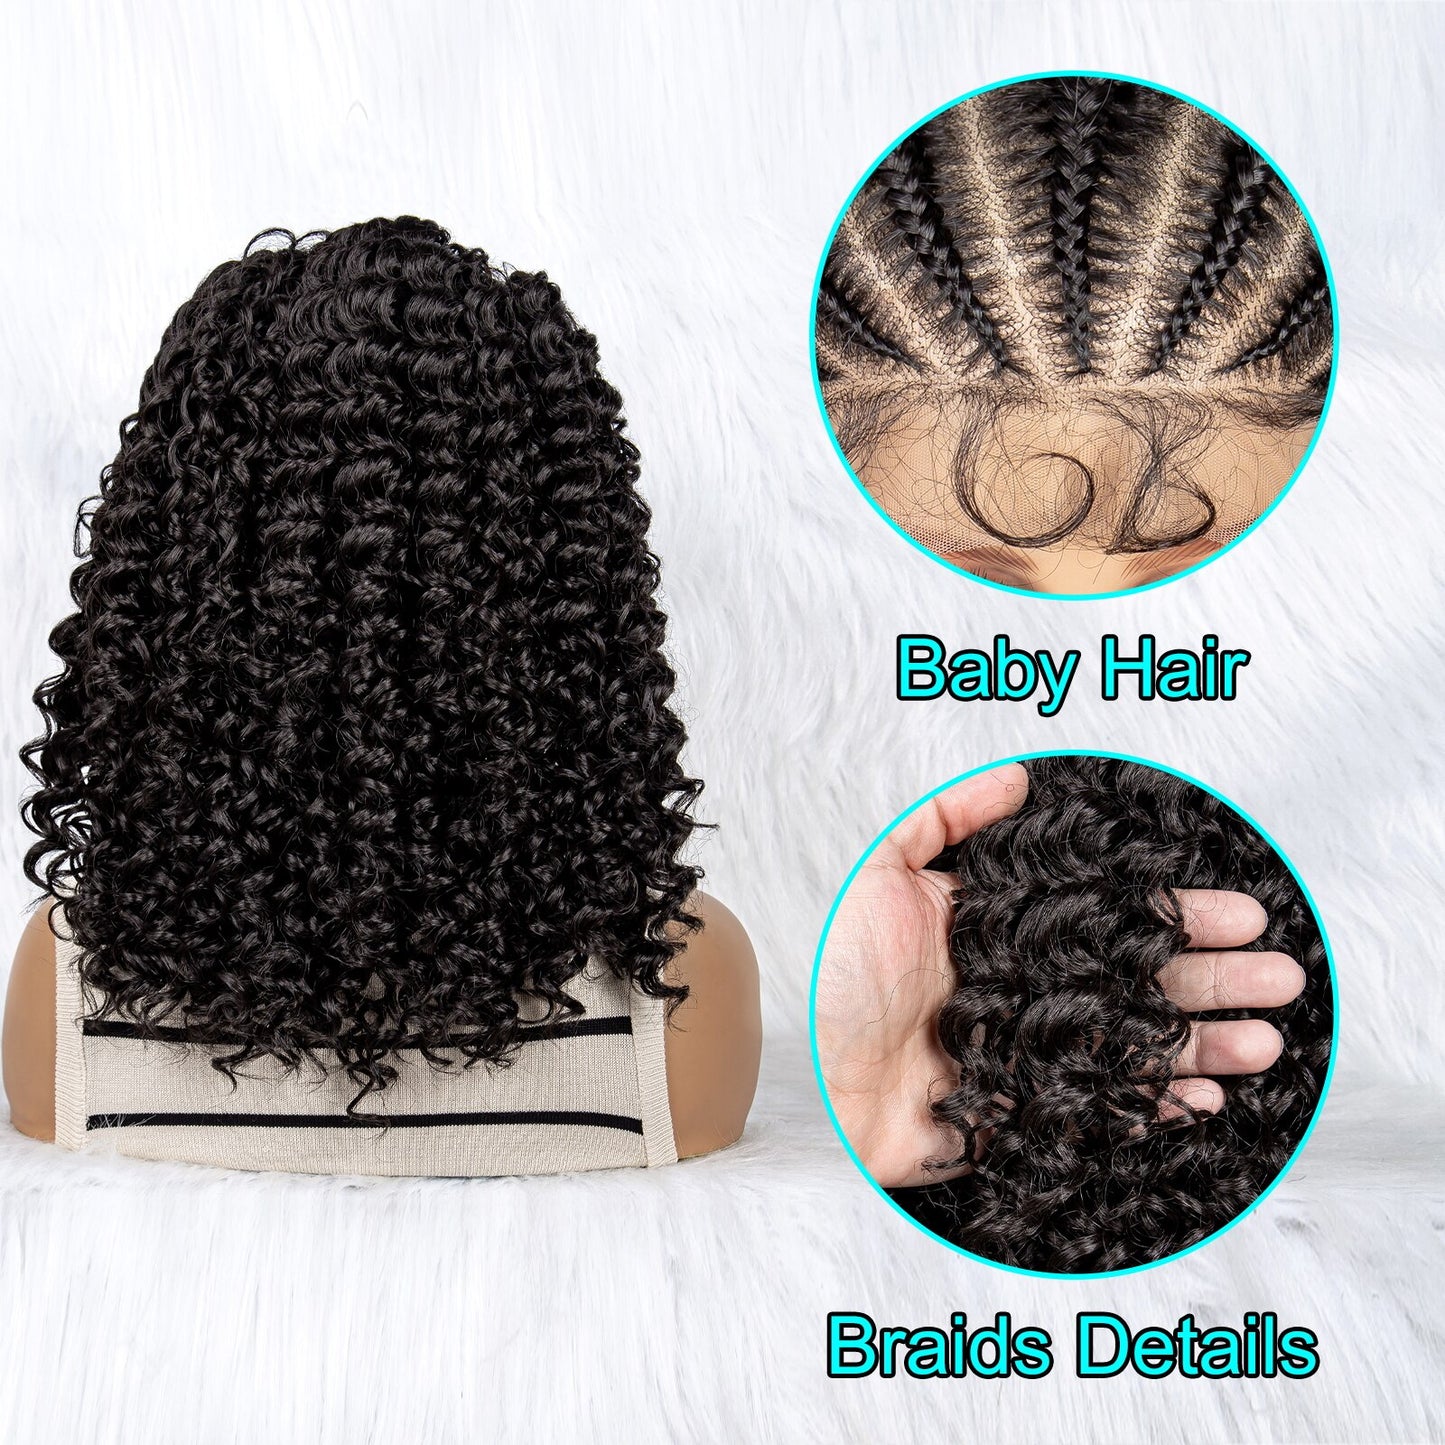 Braided Wigs Synthetic Lace Front Wig Braided Wigs With Baby Hair For Black Women Wig Kinky Curly Hair Wigs Curly Bob Wig